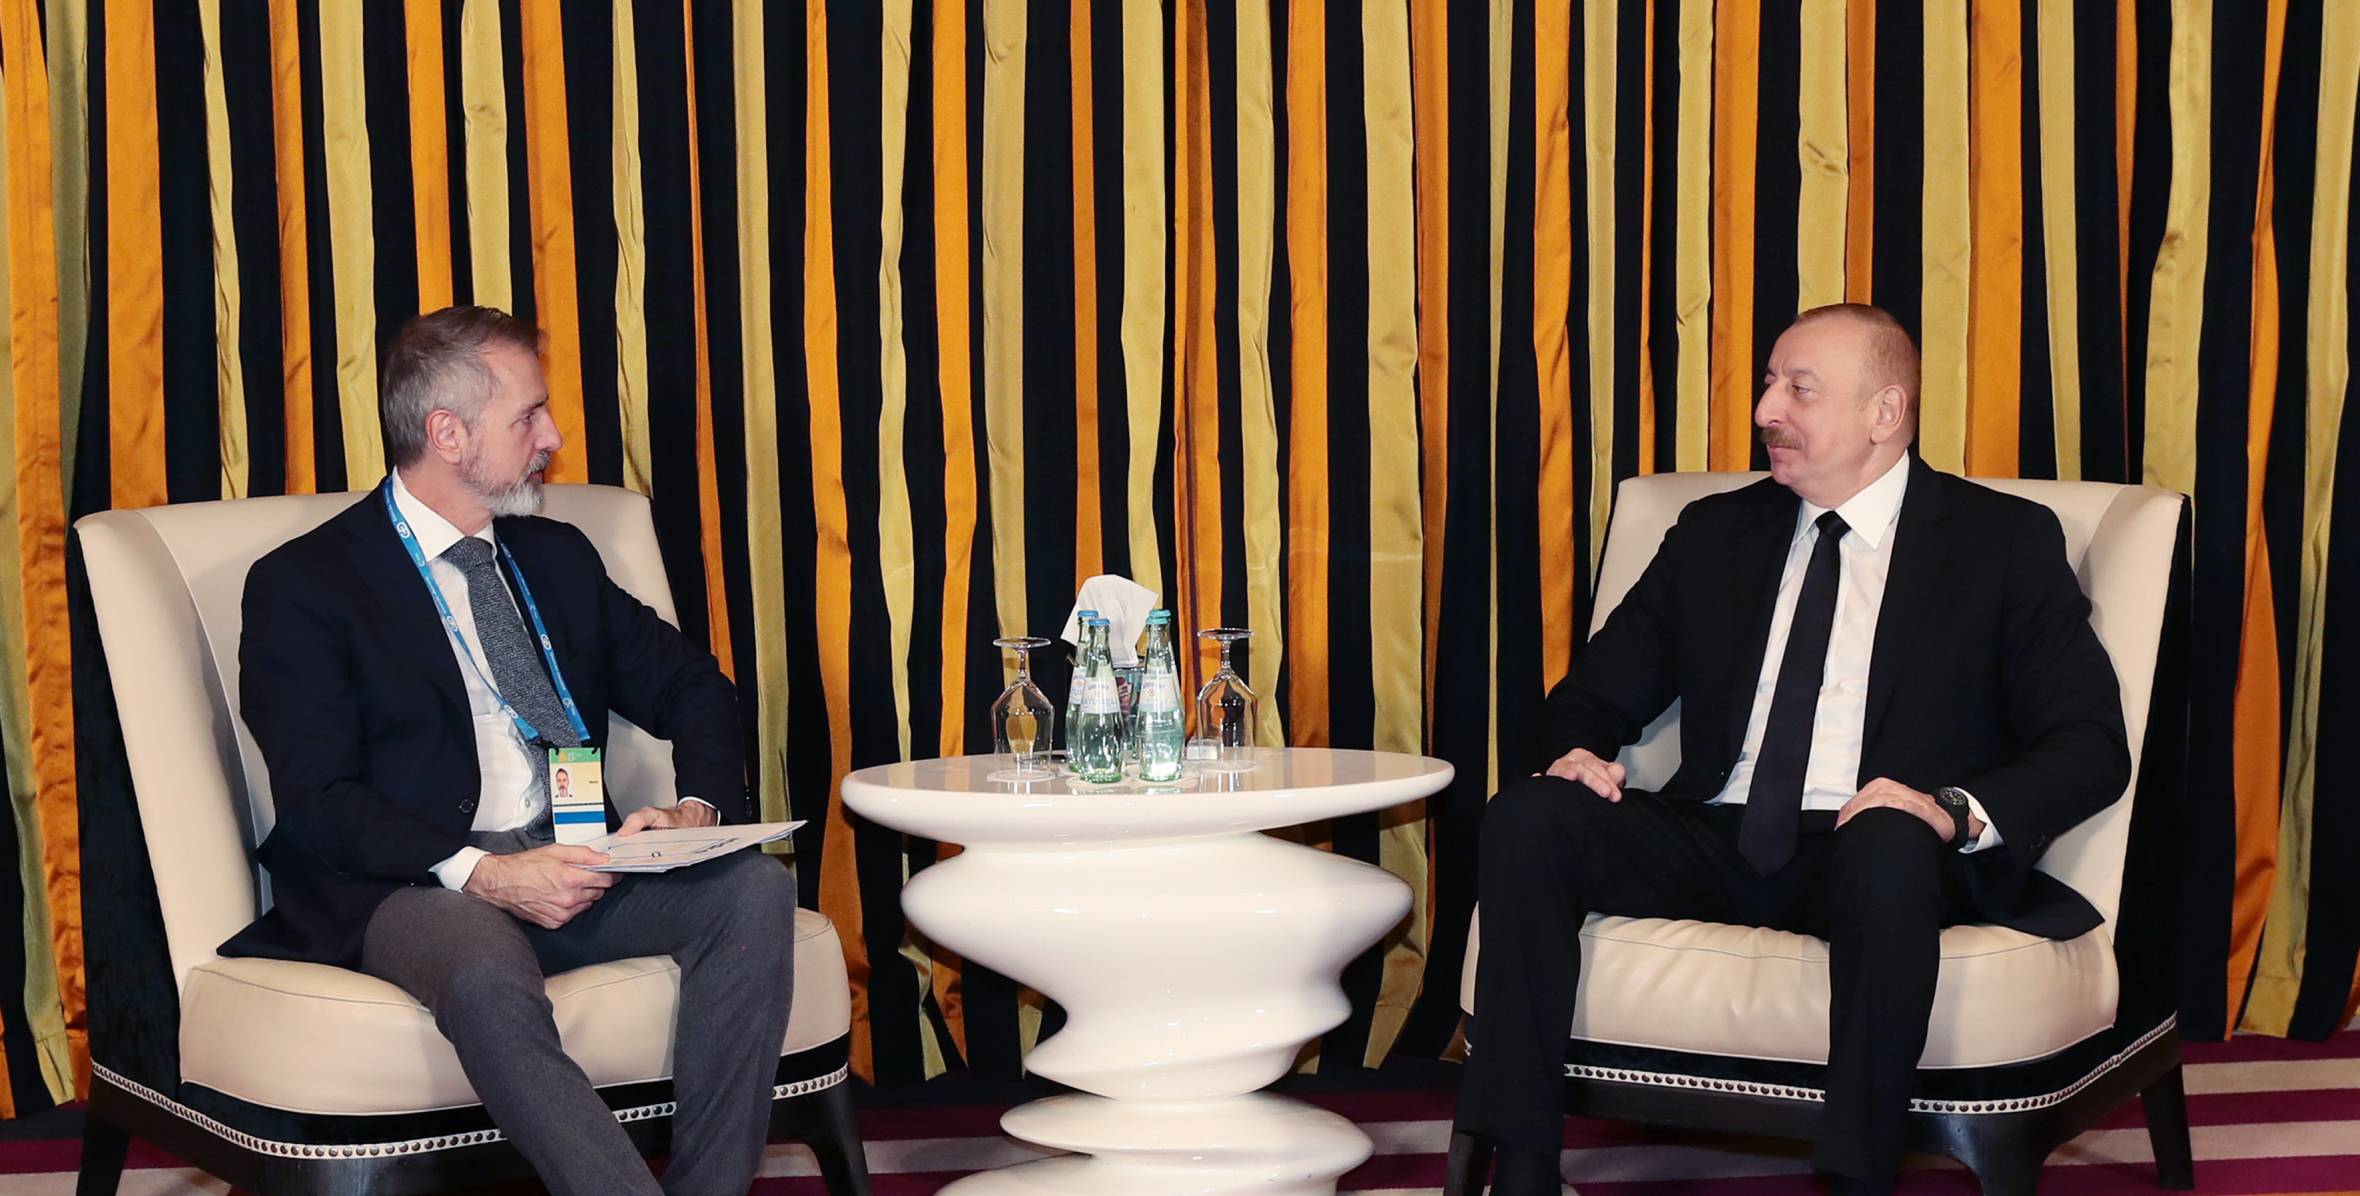 Ilham Aliyev met with Chairman of Board of Directors of Indra in Munich